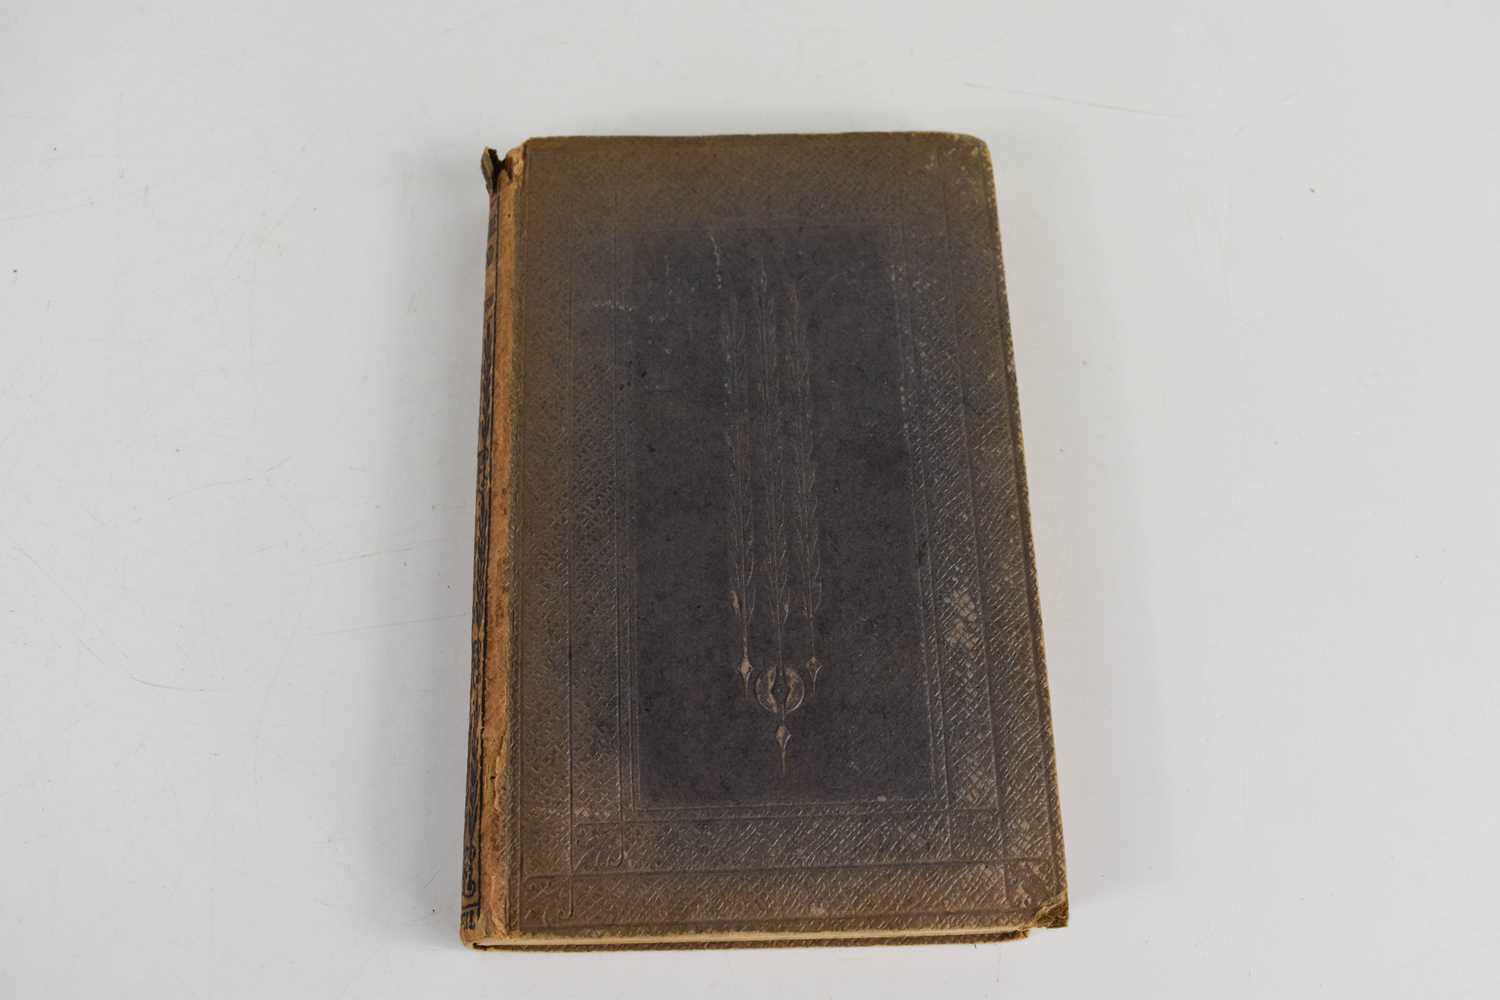 Robert Louis Stevenson, Treasure Island, 1st edition but later impression, published by Cassell - Image 3 of 3